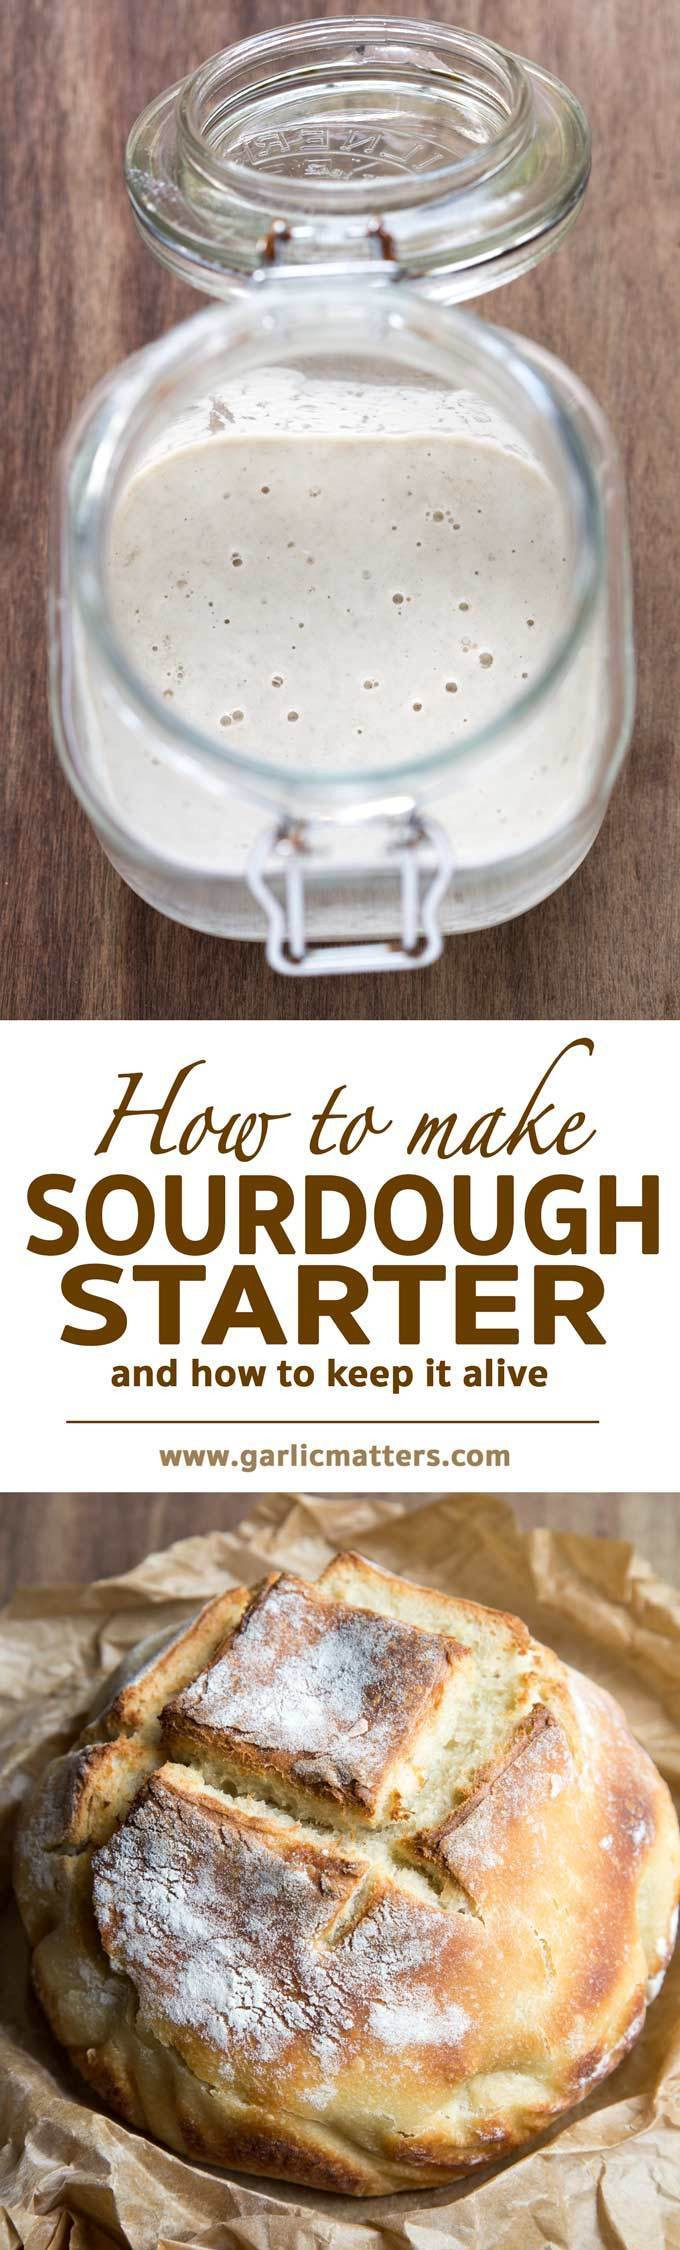 How To Make Sourdough Bread Starter
 HOW TO MAKE AND KEEP SOURDOUGH STARTER